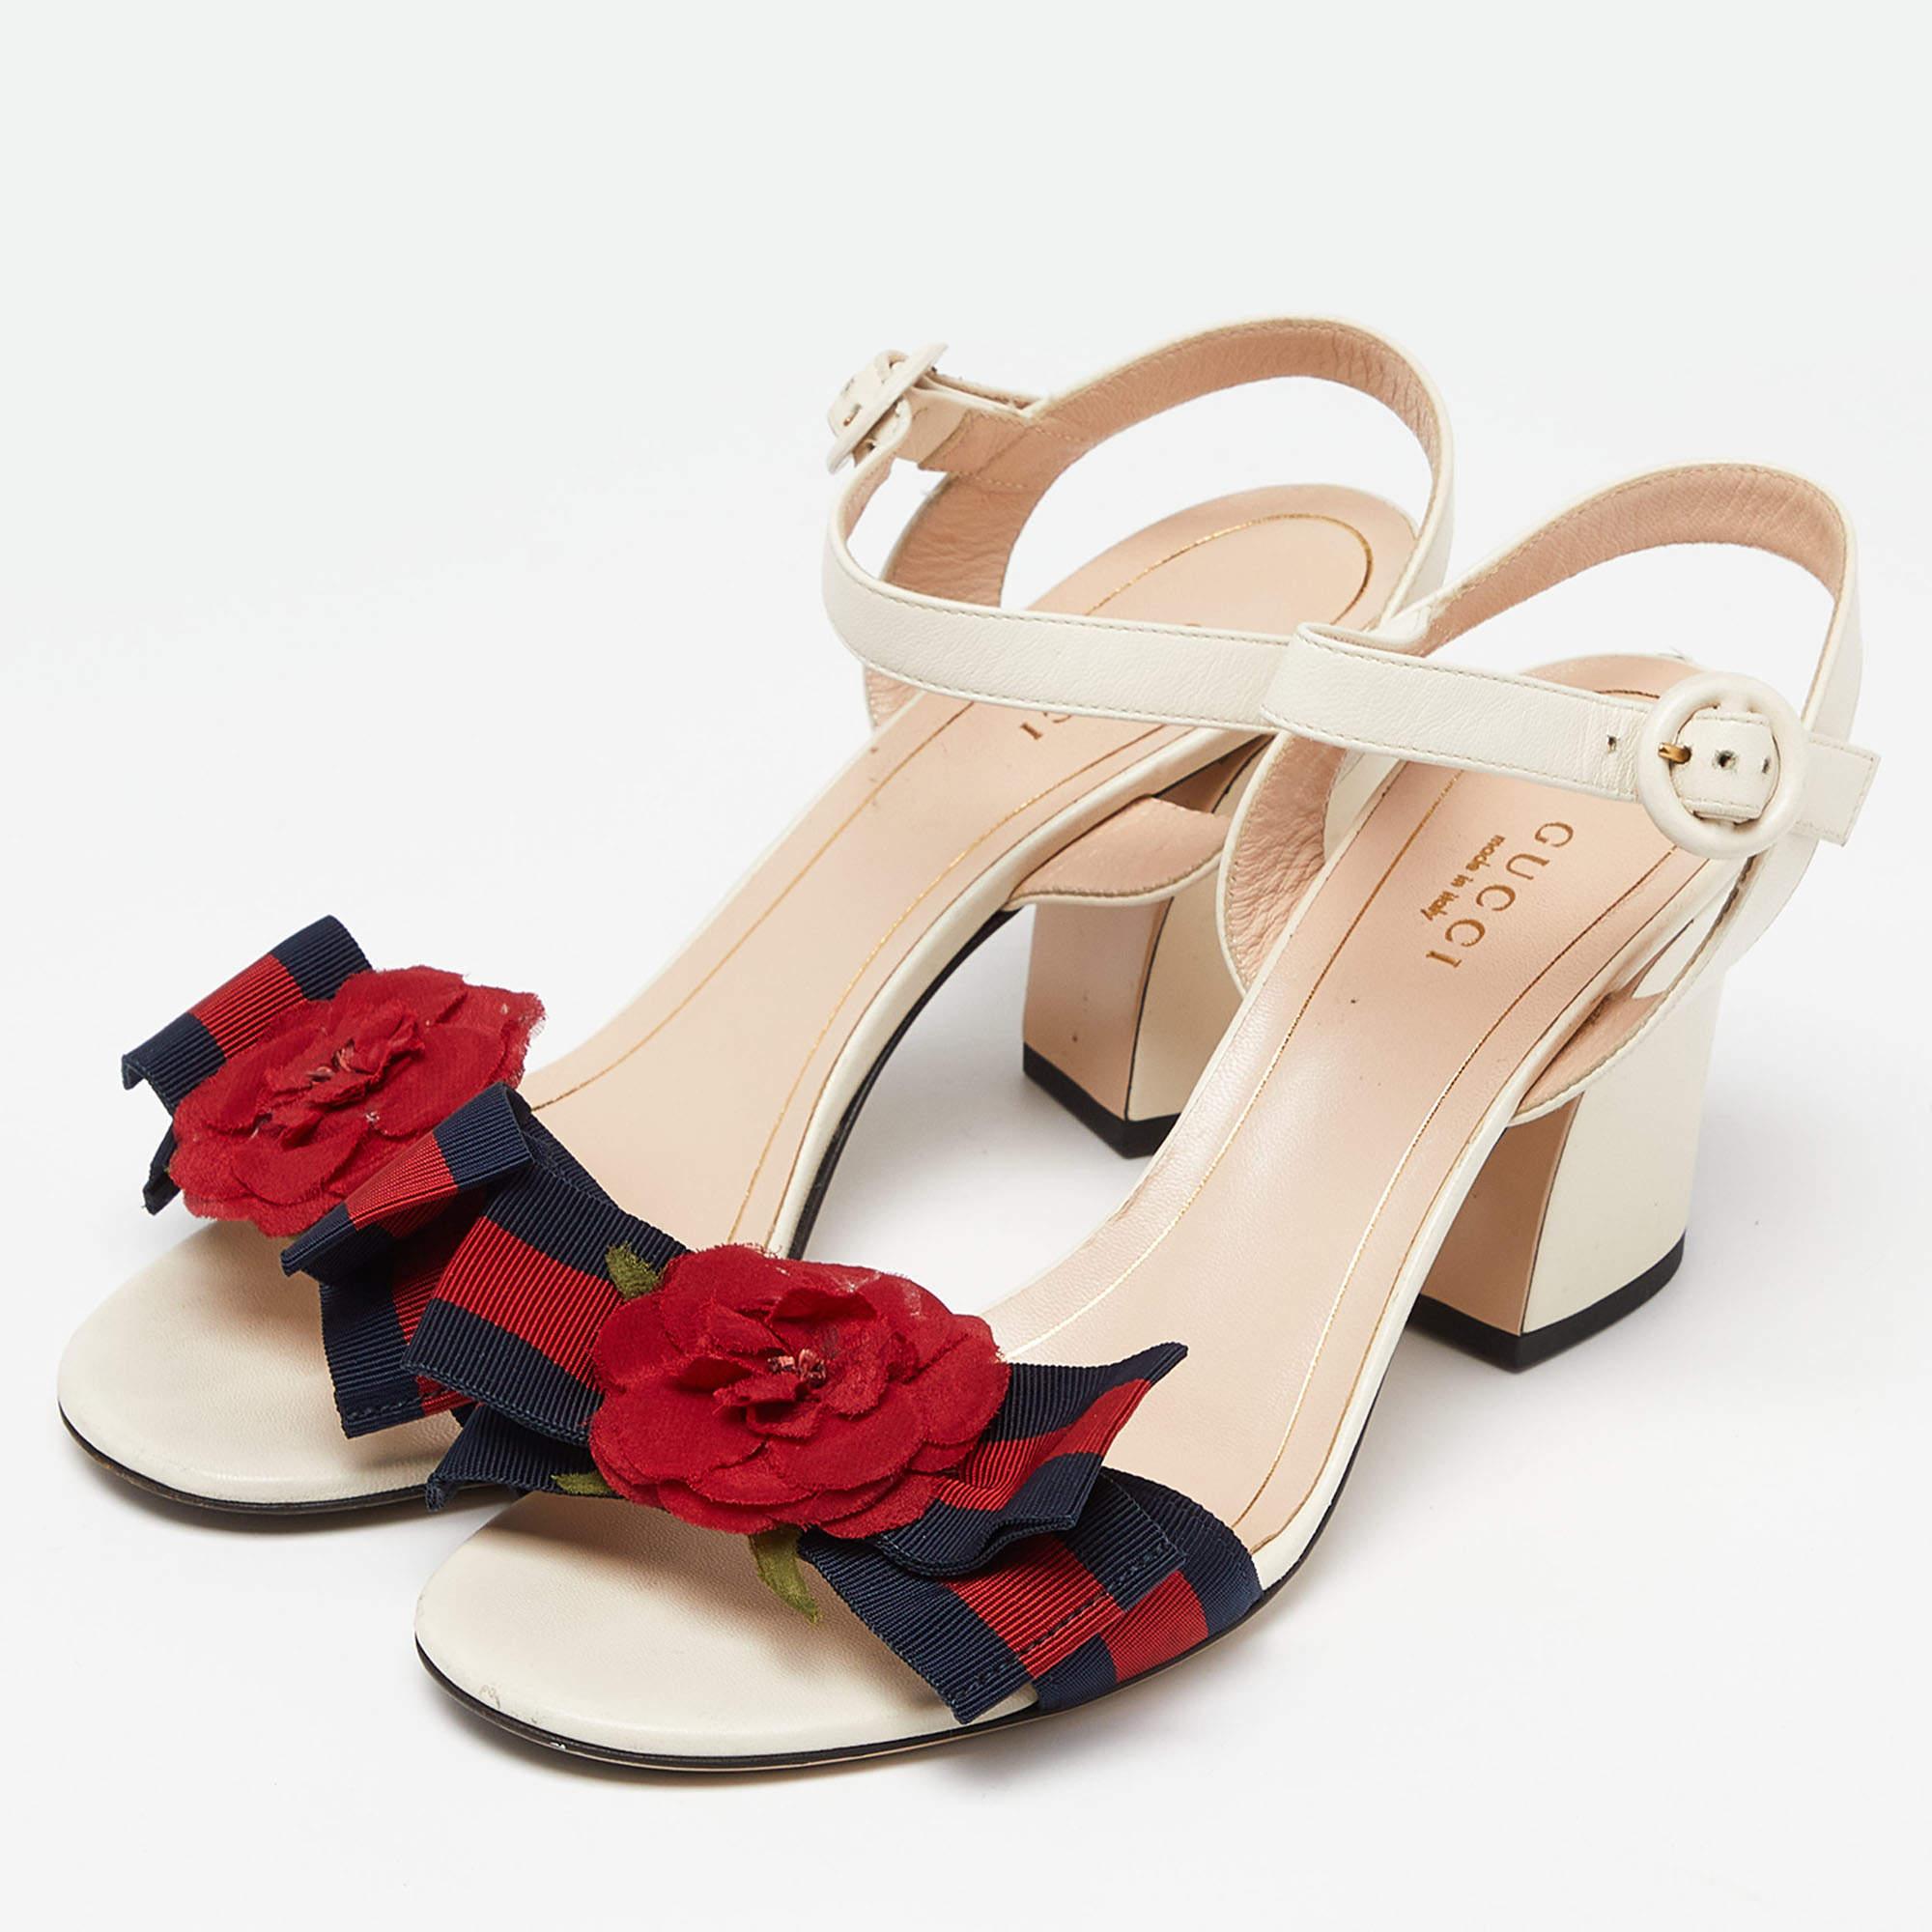 Gucci Cream Leather and Canvas Bow Flower Ankle Strap Sandals Size 37.5 1